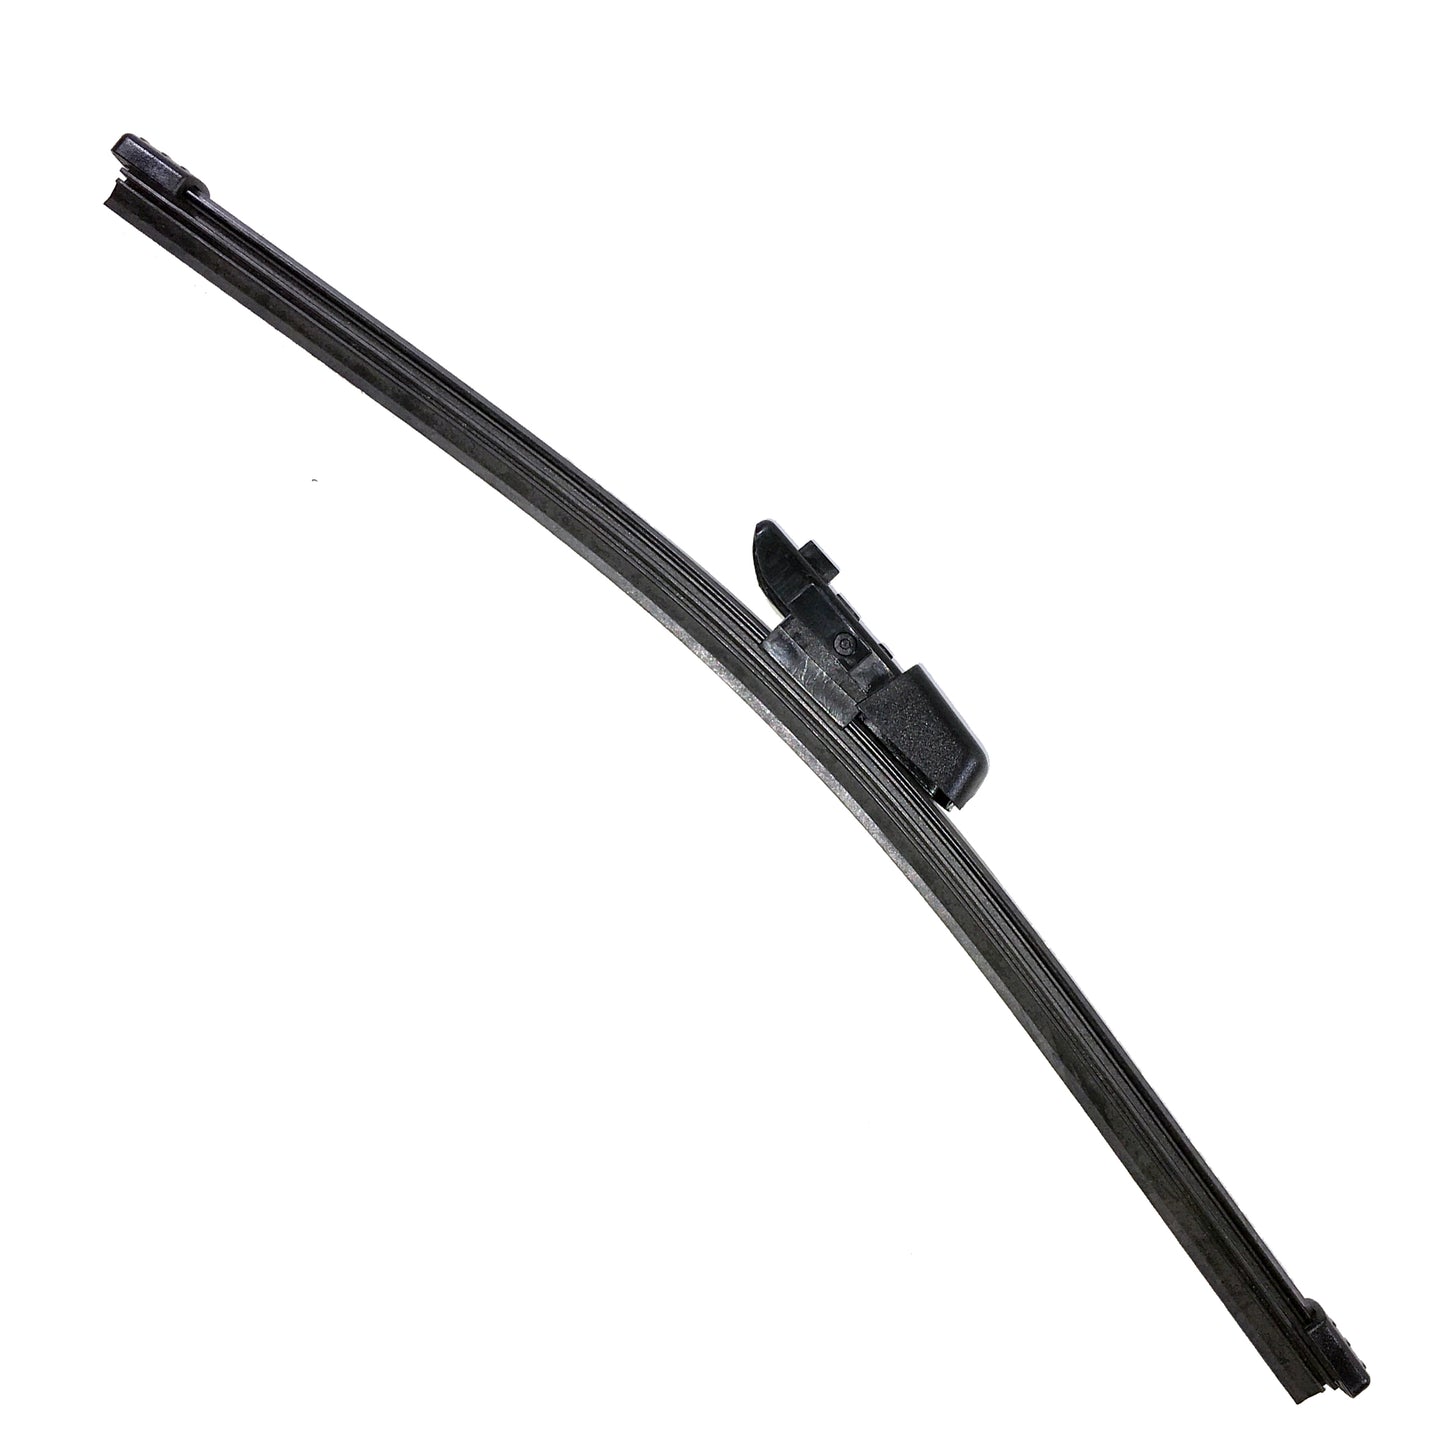 VW SCIROCCO Coupe May 2008 to Apr 2018Rear Wiper Blade 